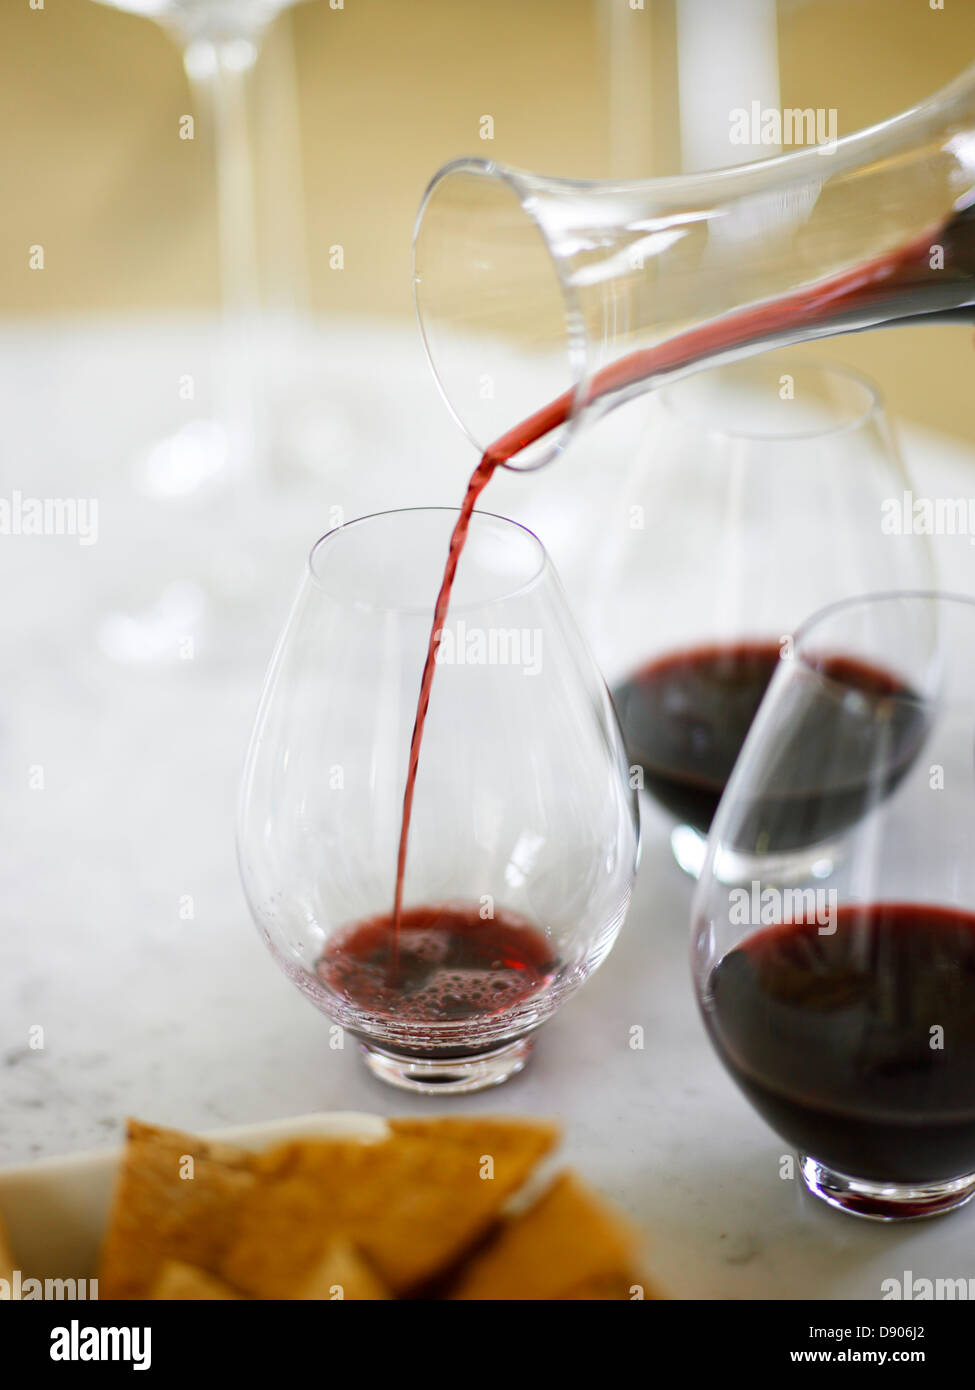 Wine carafe and a wineglass. Stock Photo